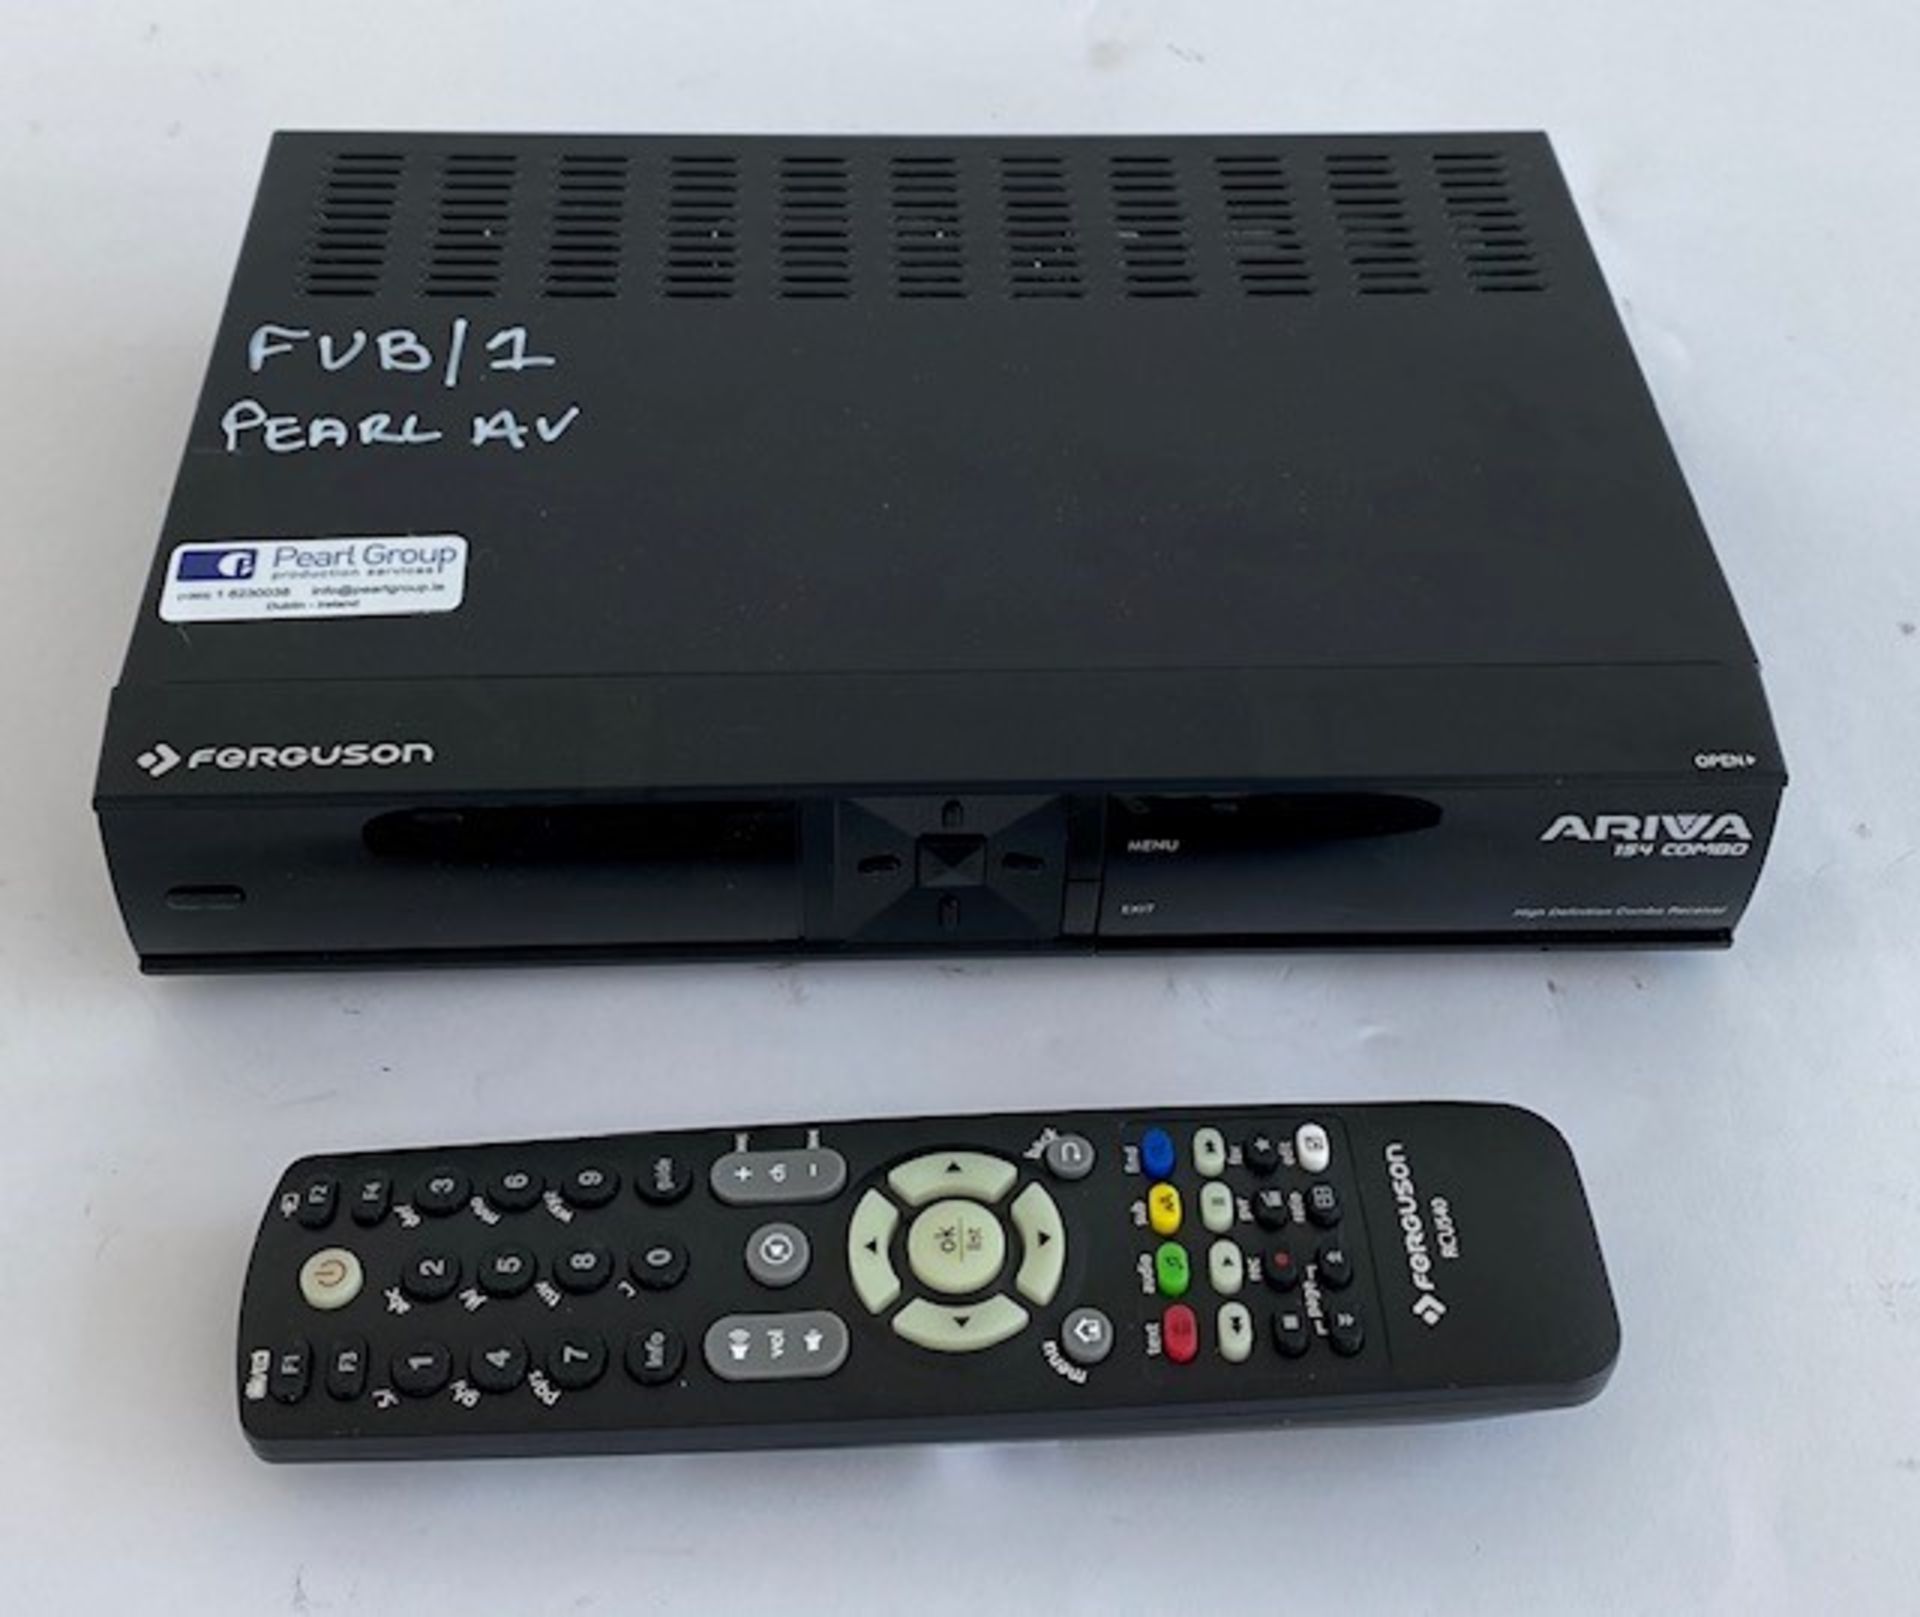 1 x Ferguson Ariva 154 Combo Freeview box inc. Remote And PSU In Flight Case - Ref: 169 - CL581 -